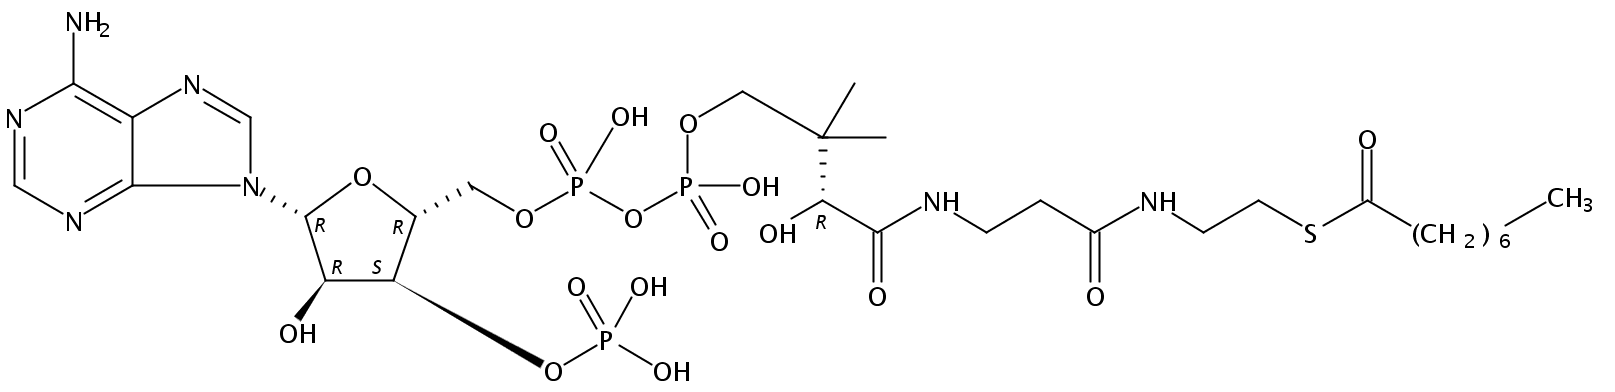 Structural formula of Octanoyl Coenzyme A free acid